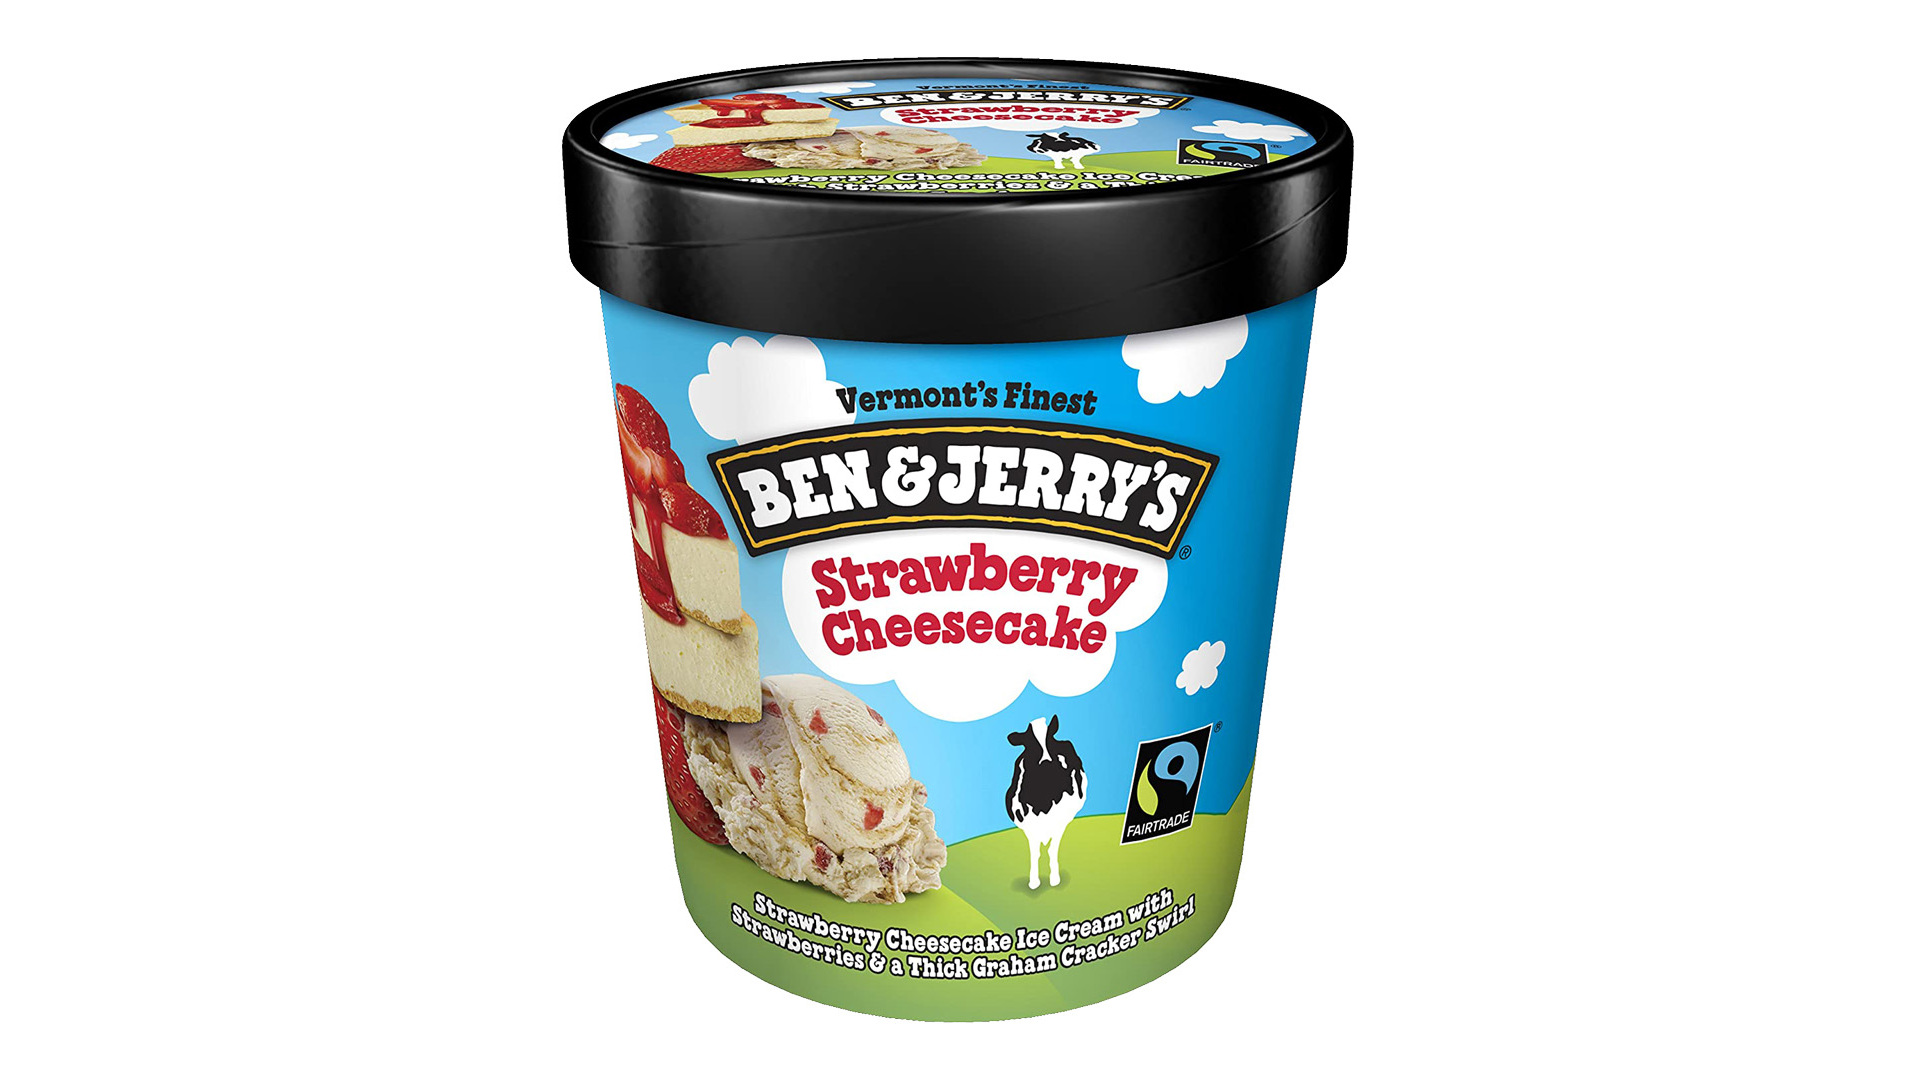 Ben & Jerry's Strawberry Cheesecake 500ml - Chicken Delivery in Snaresbrook E11